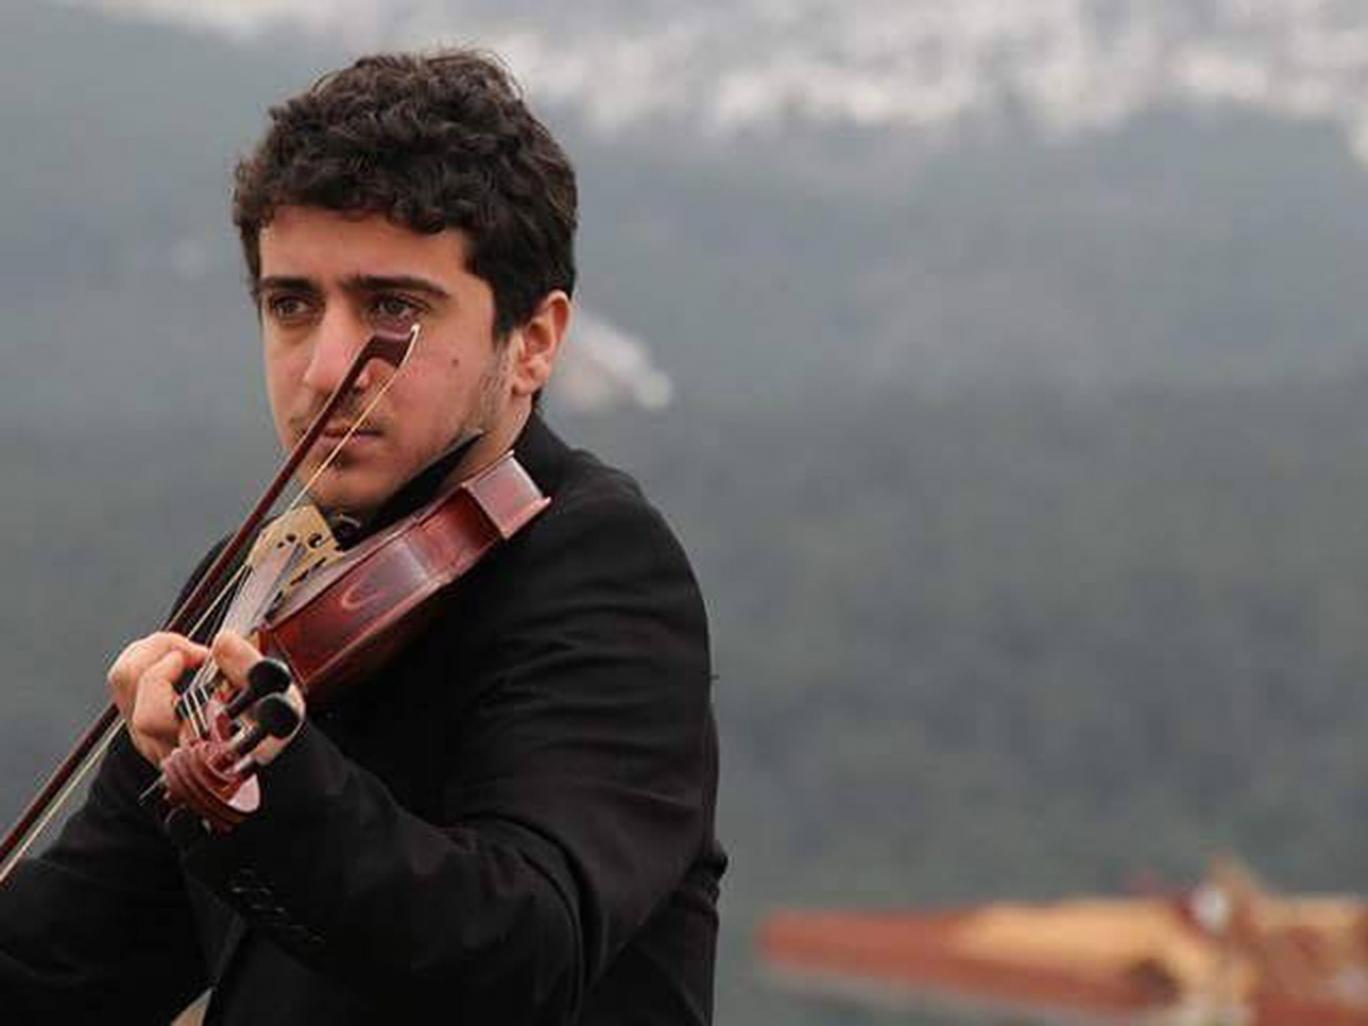 The story of the Kurdish musician who drowned clutching his violin in refugee boat disaster